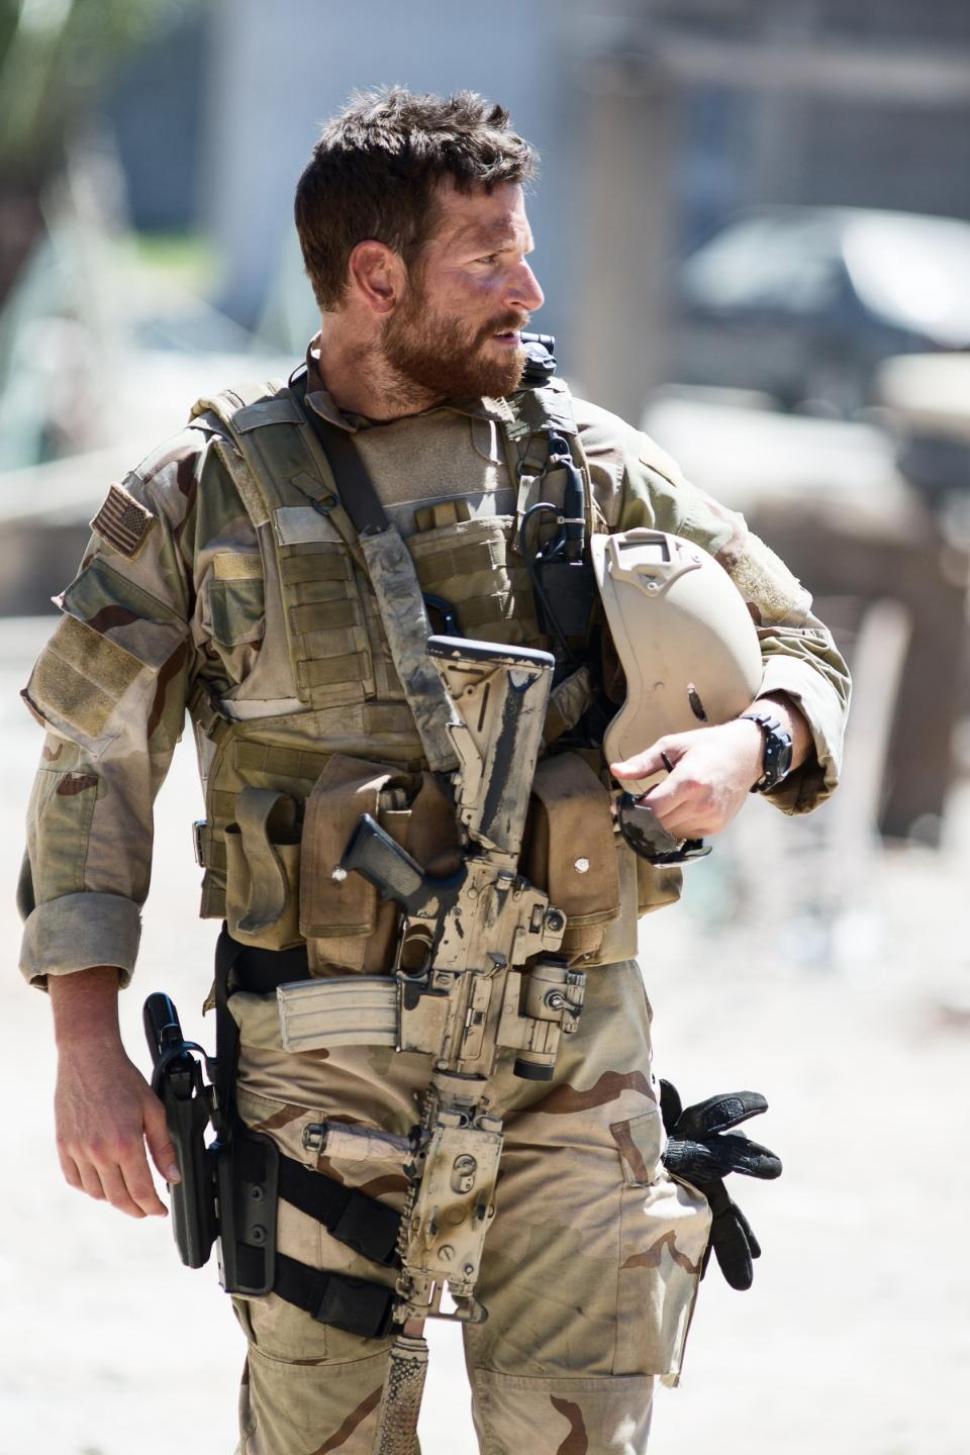 Bradley Cooper portrayed Chris Kyle in the movie 'American Sniper,' and while Moore has commended Cooper on his performance, he was harsh of the depiction that director Clint Eastwood has given snipers.